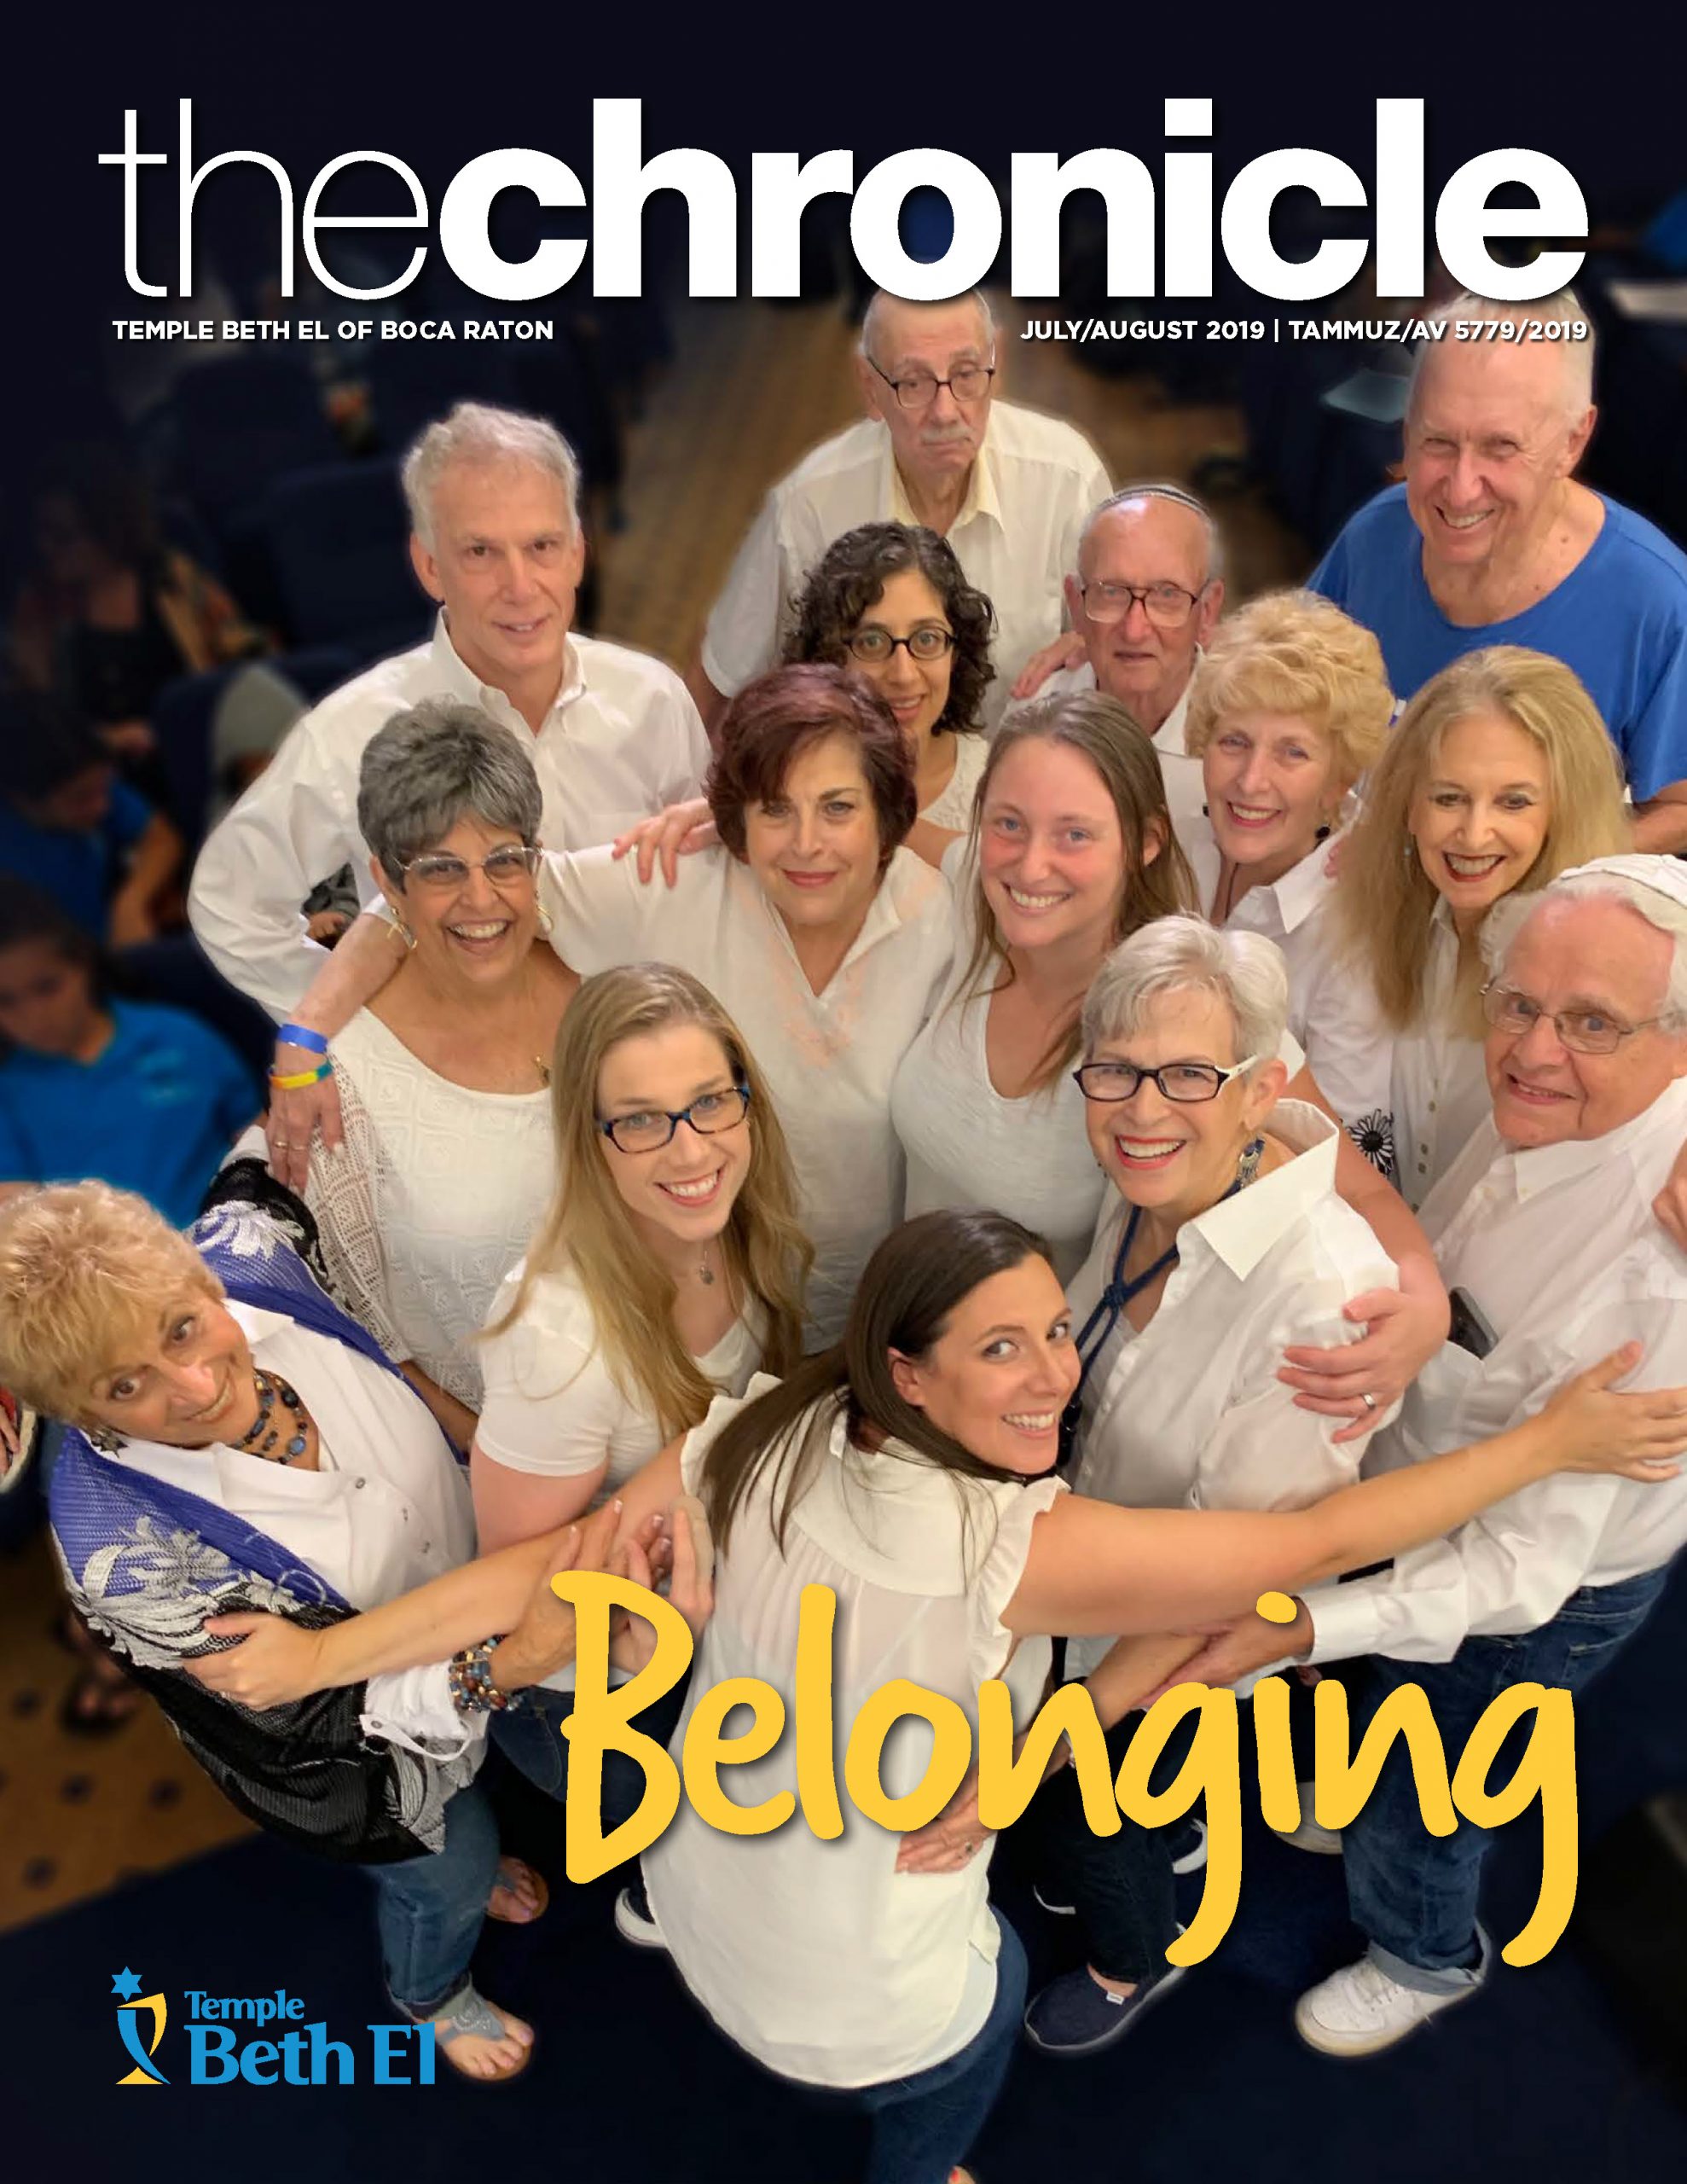 The Chronicle, July August 2019, Newsletter published by Temple Beth El of Boca Raton, Fl